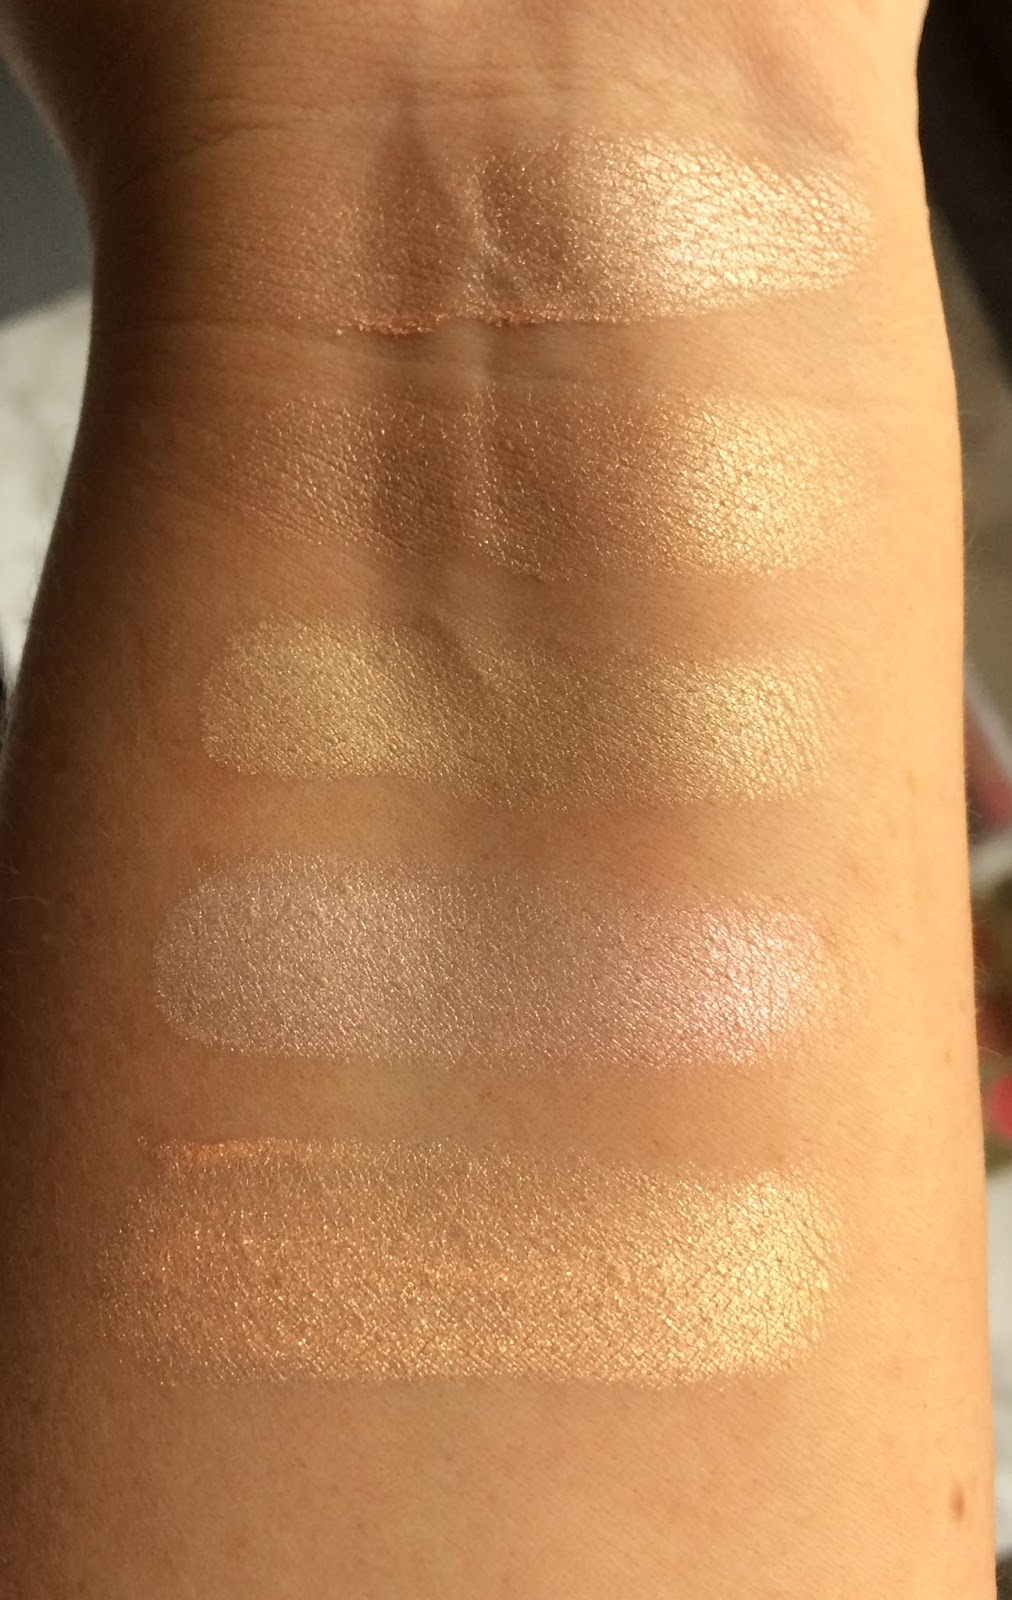 Champagne Pop, MaryLou Manizer, DIOR, MAC Soft & Gentle, Make Up Forever Golden Pink swatches